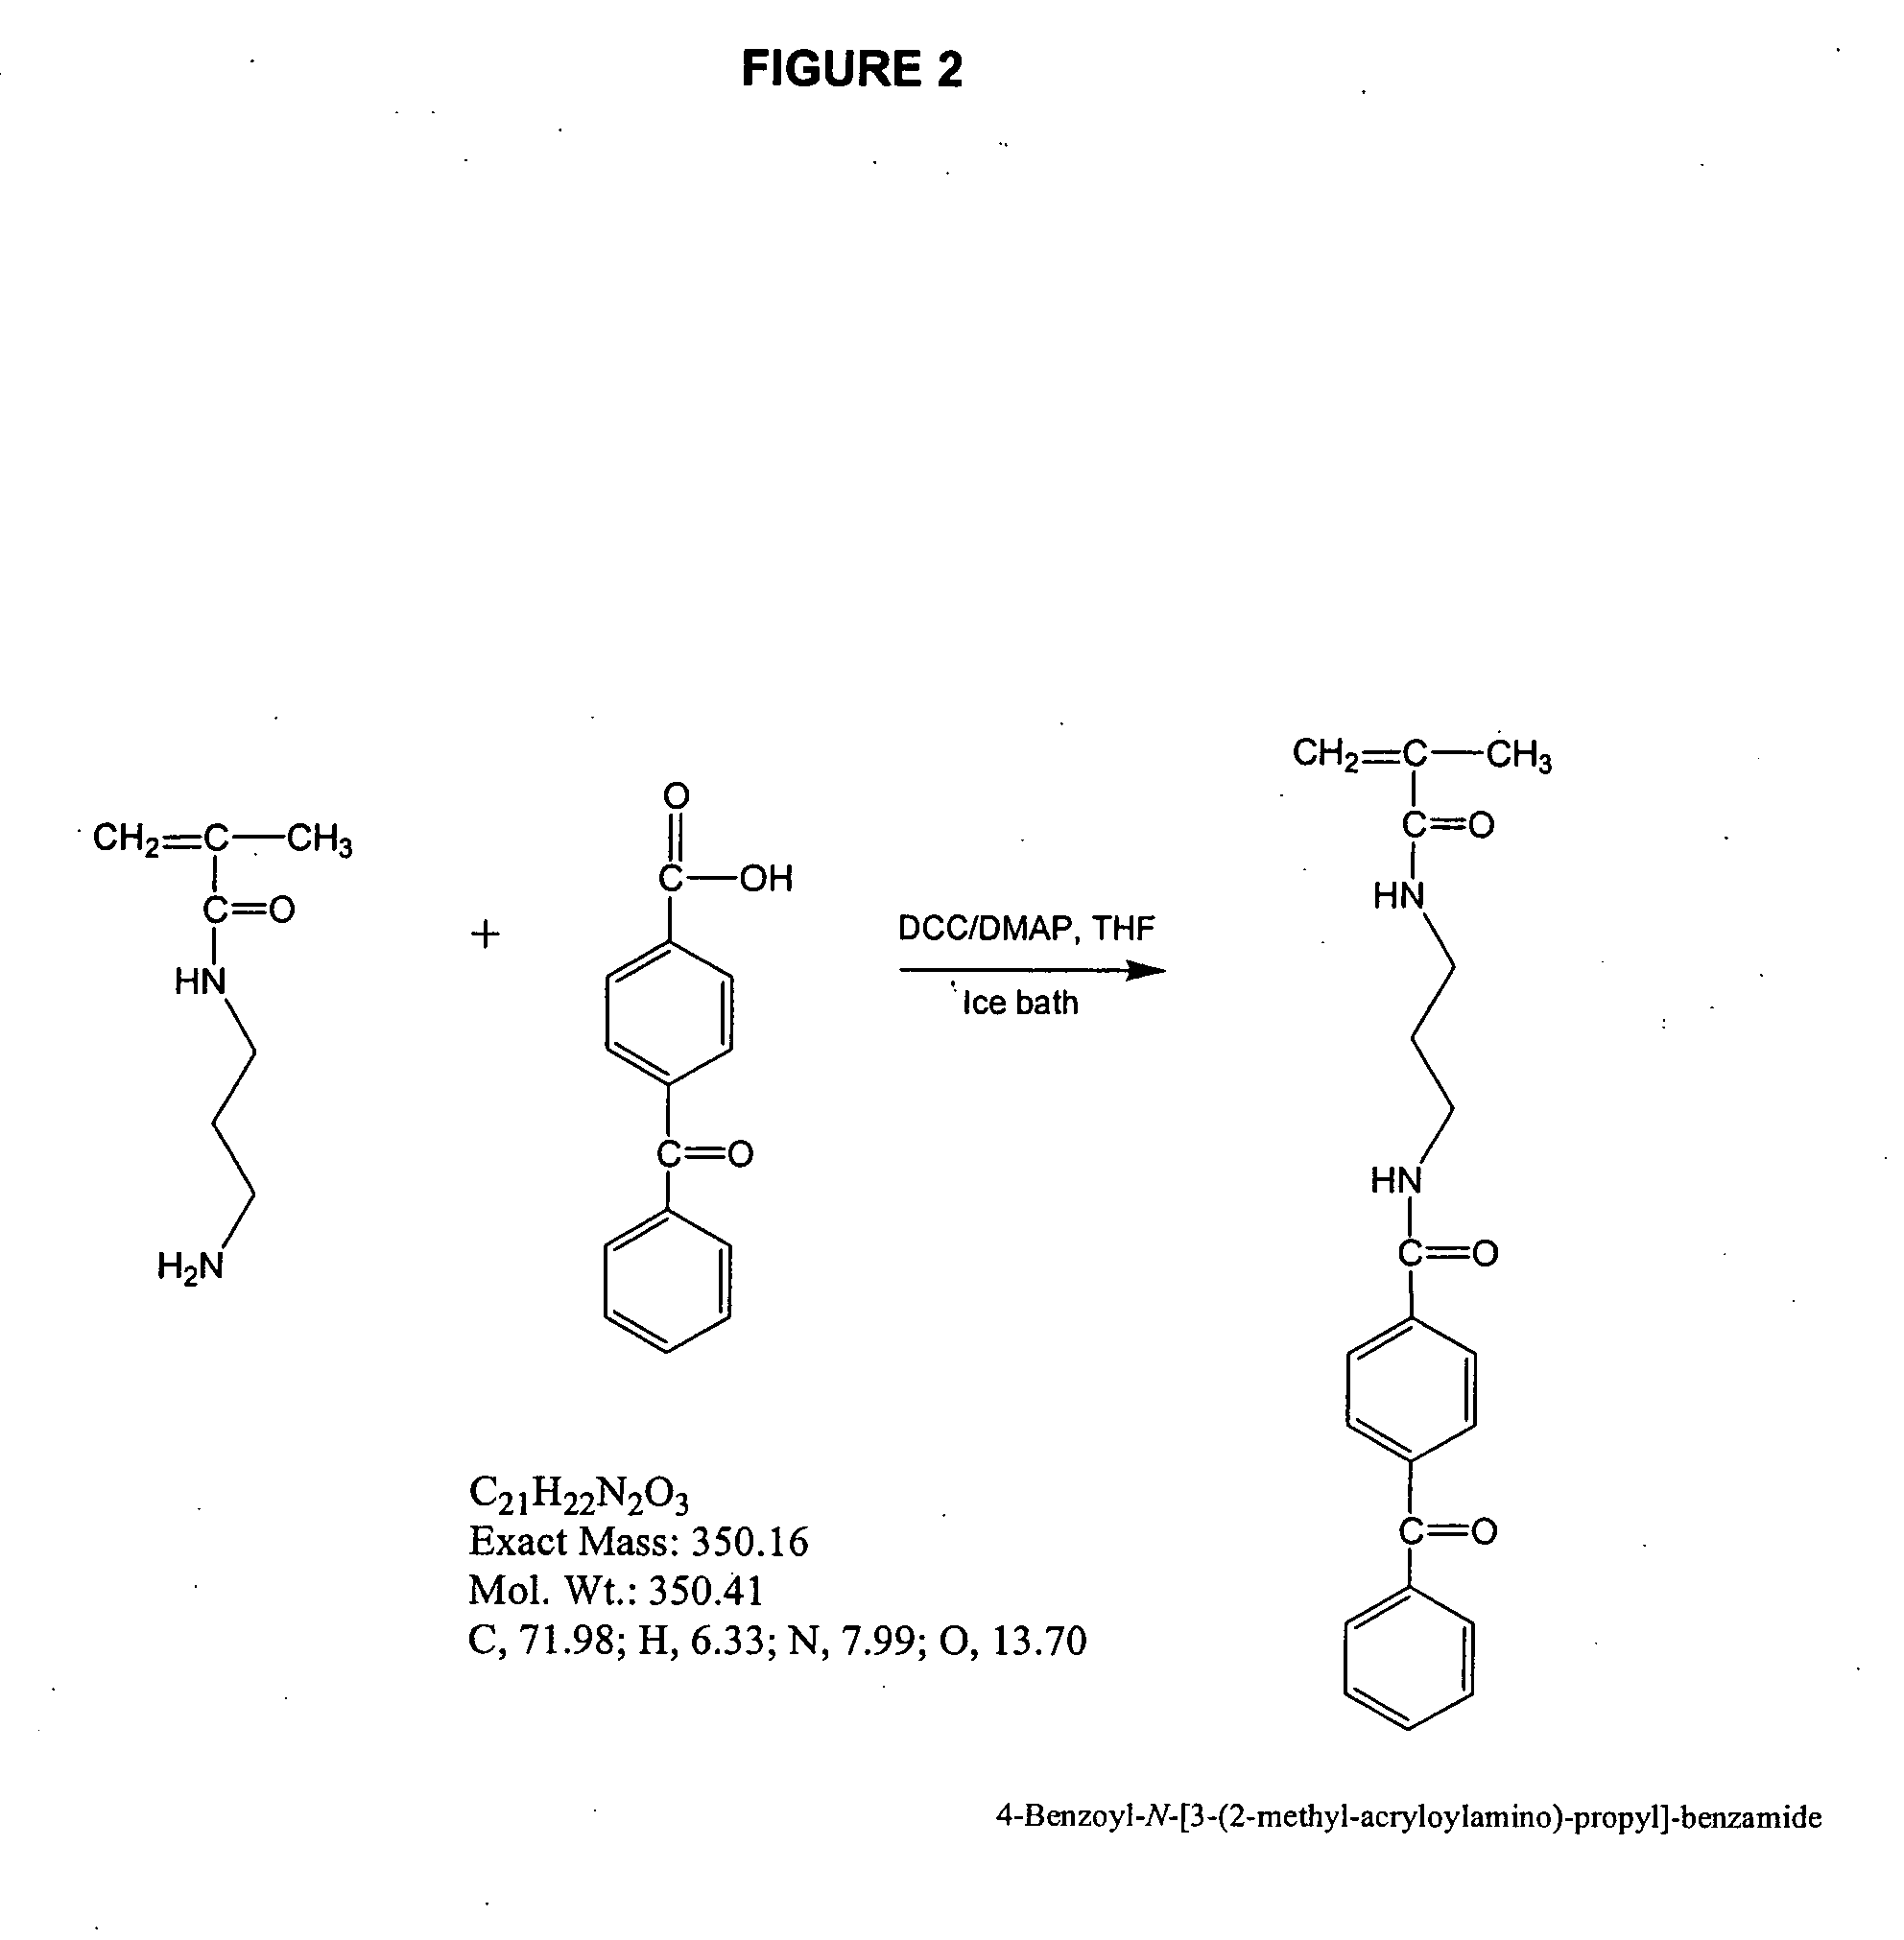 Zwitterionic polymers